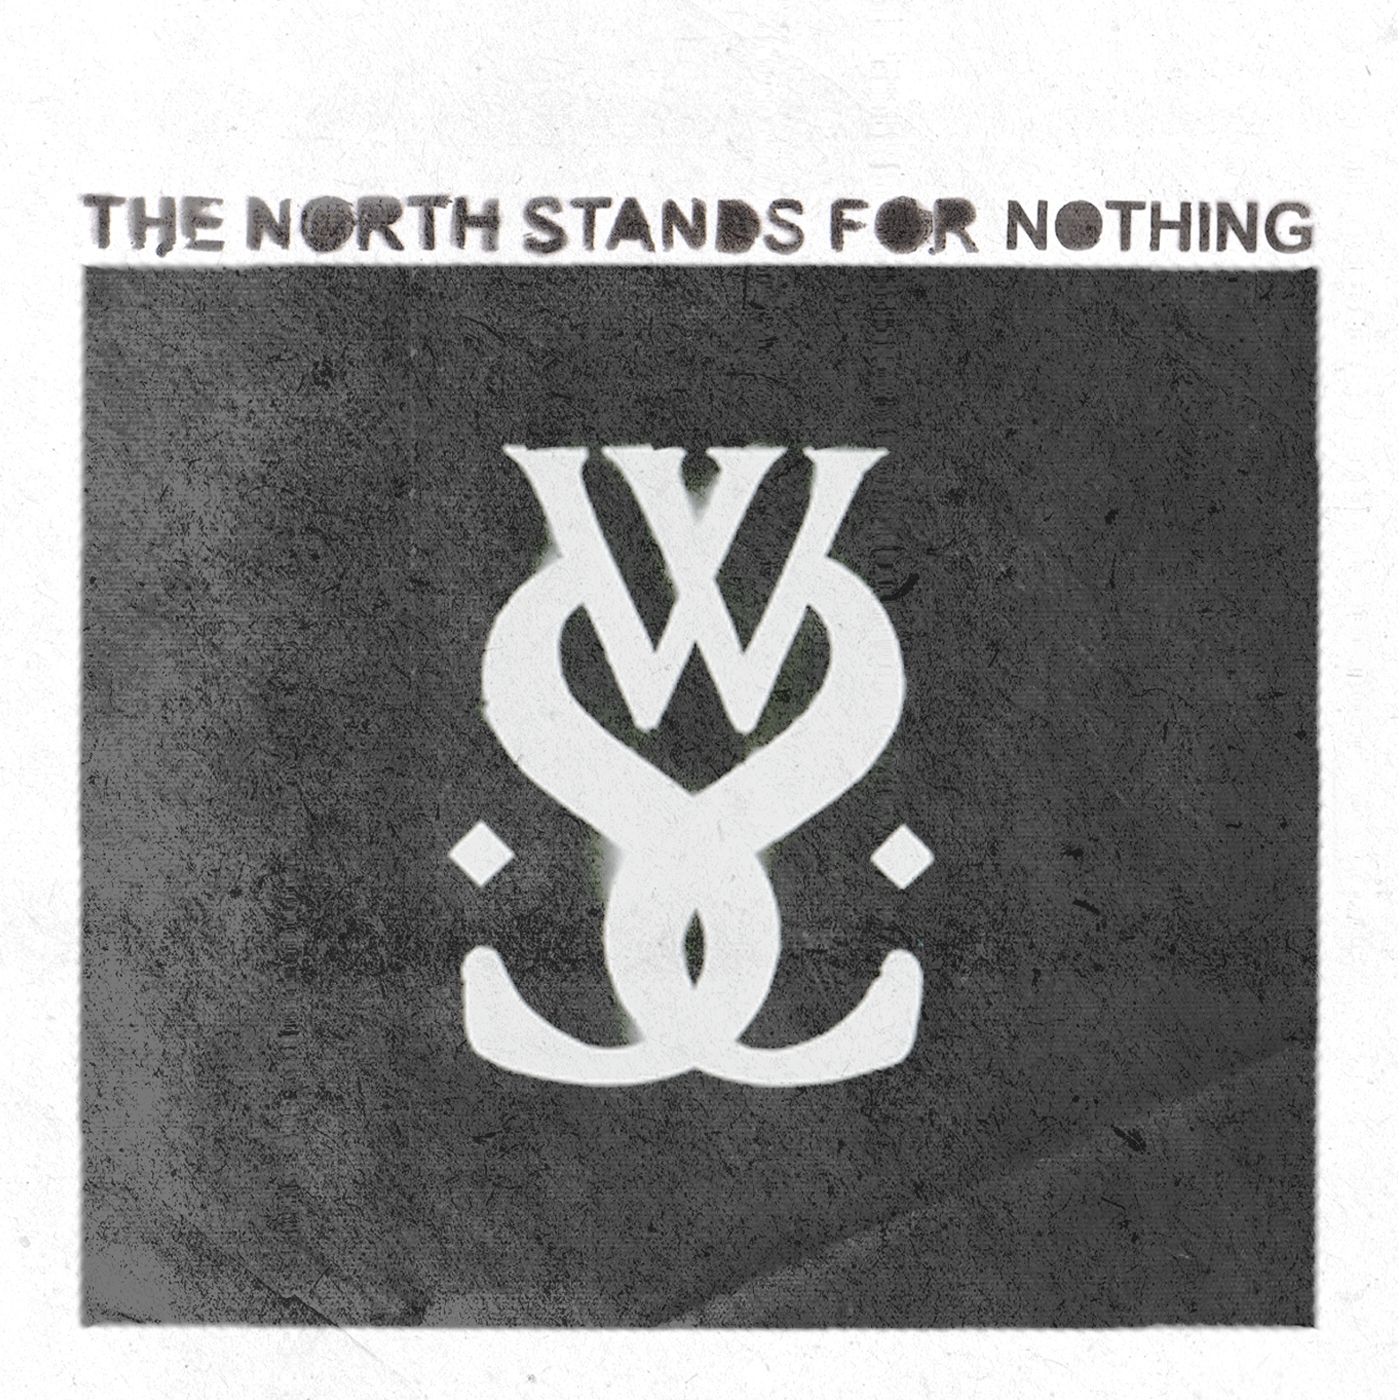 Imagem do álbum North Stands For Nothing do(a) artista While She Sleeps